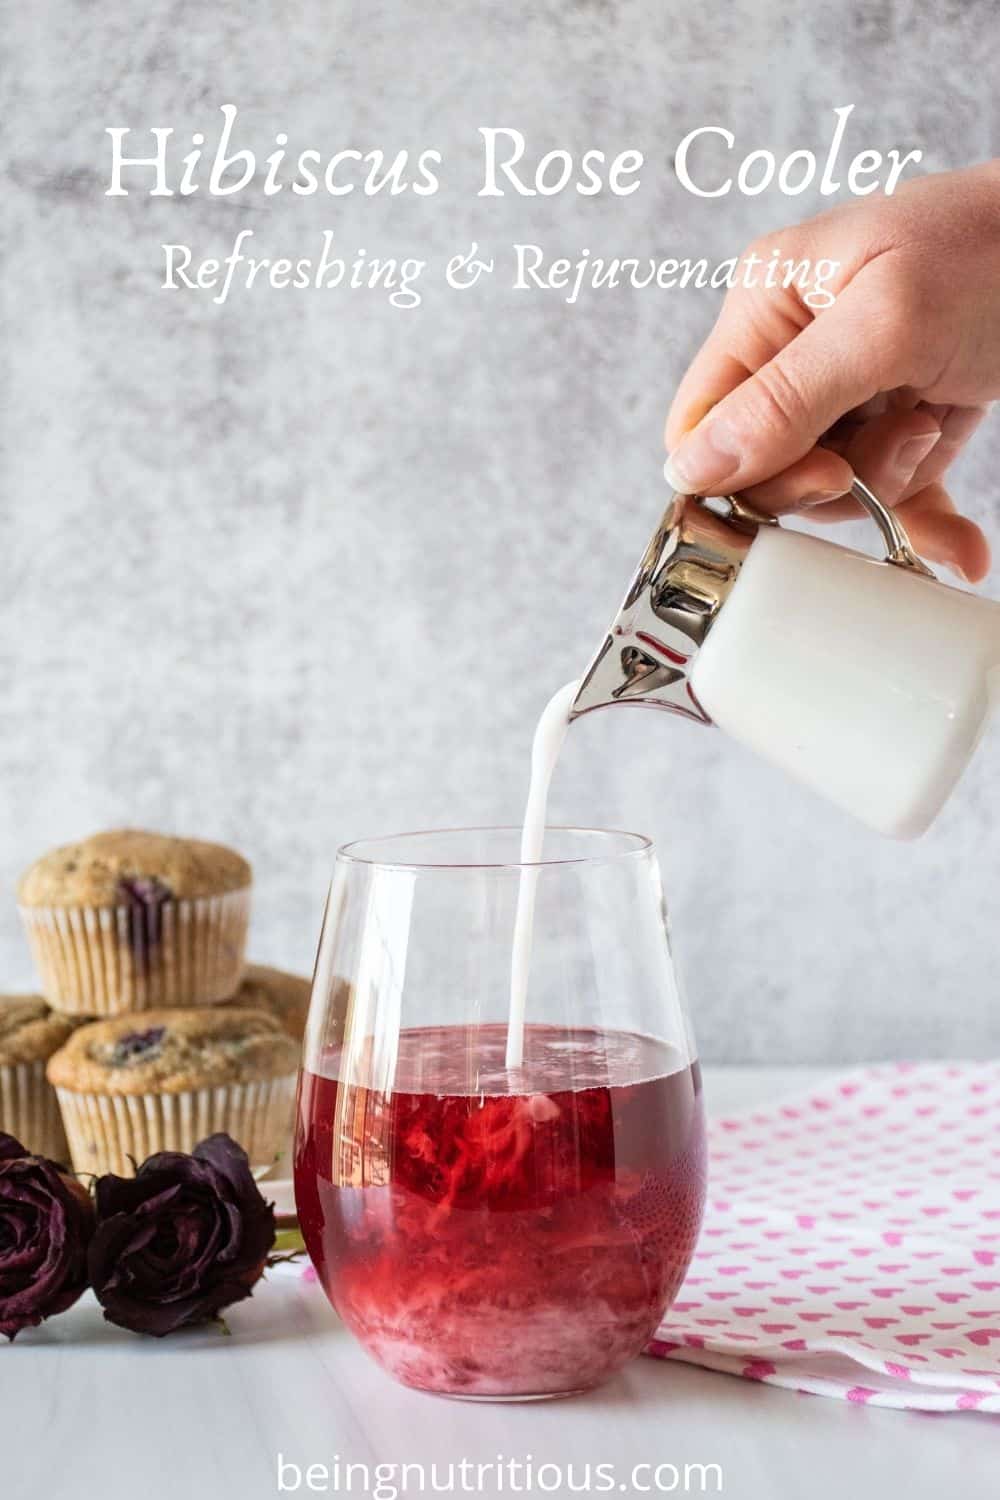 Glass of red tea with coconut milk being poured in. Text overlay: Hibiscus Rose Cooler; Refreshing & Rejuvenating.